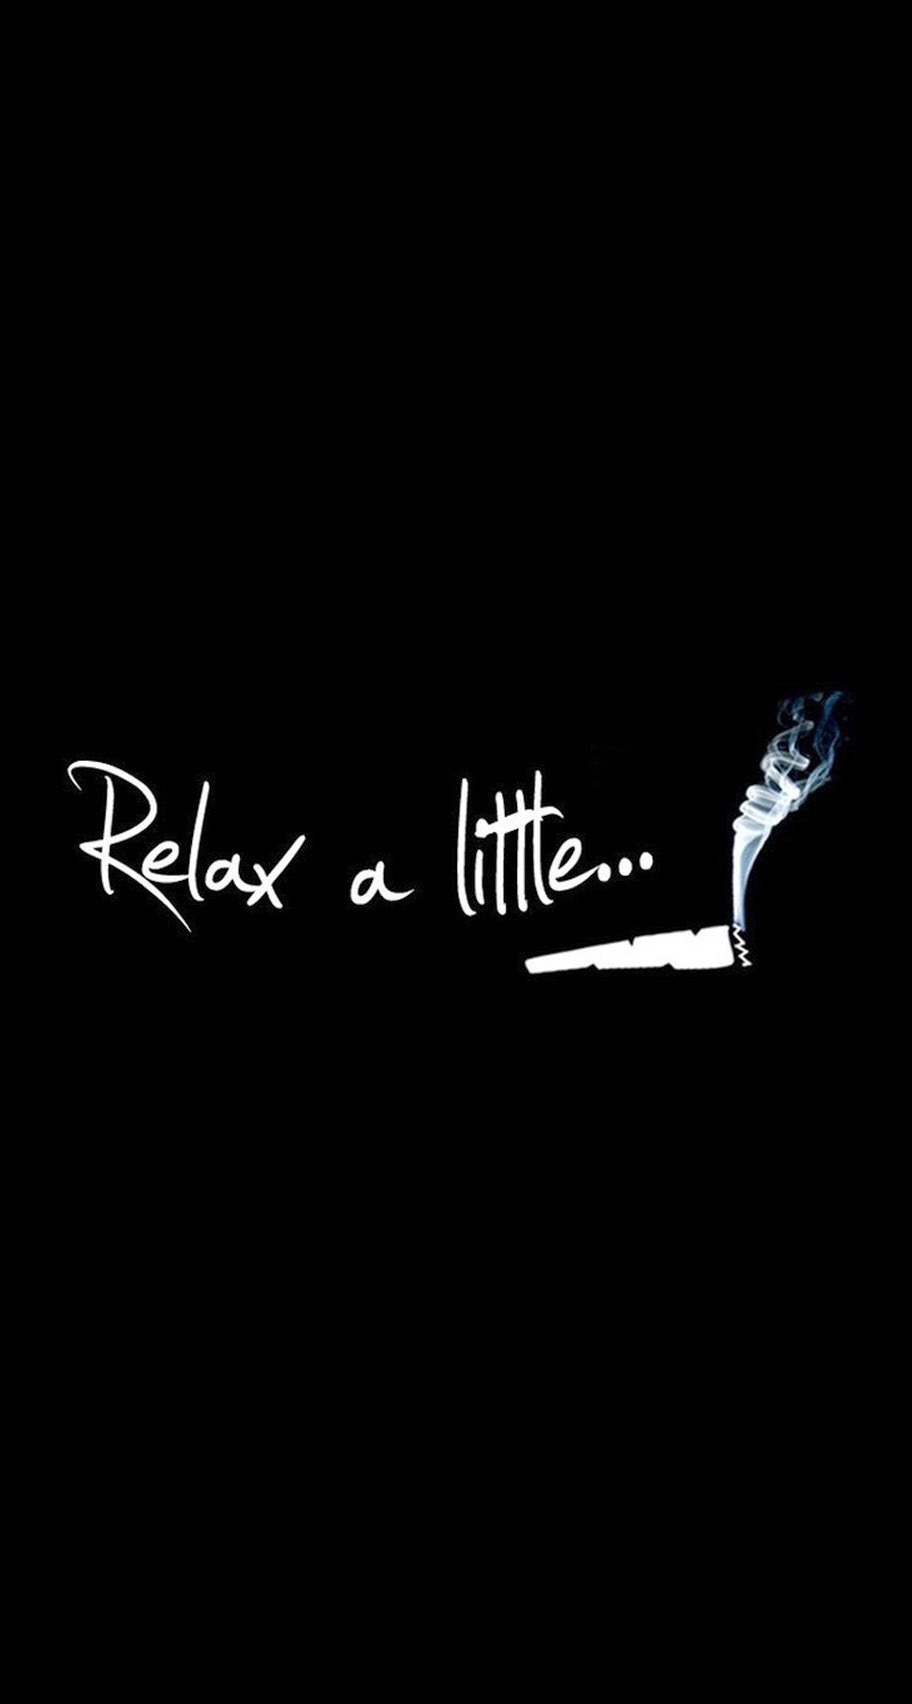 Relax A Little Smoke Weed iPhone 6 Plus HD Wallpaper